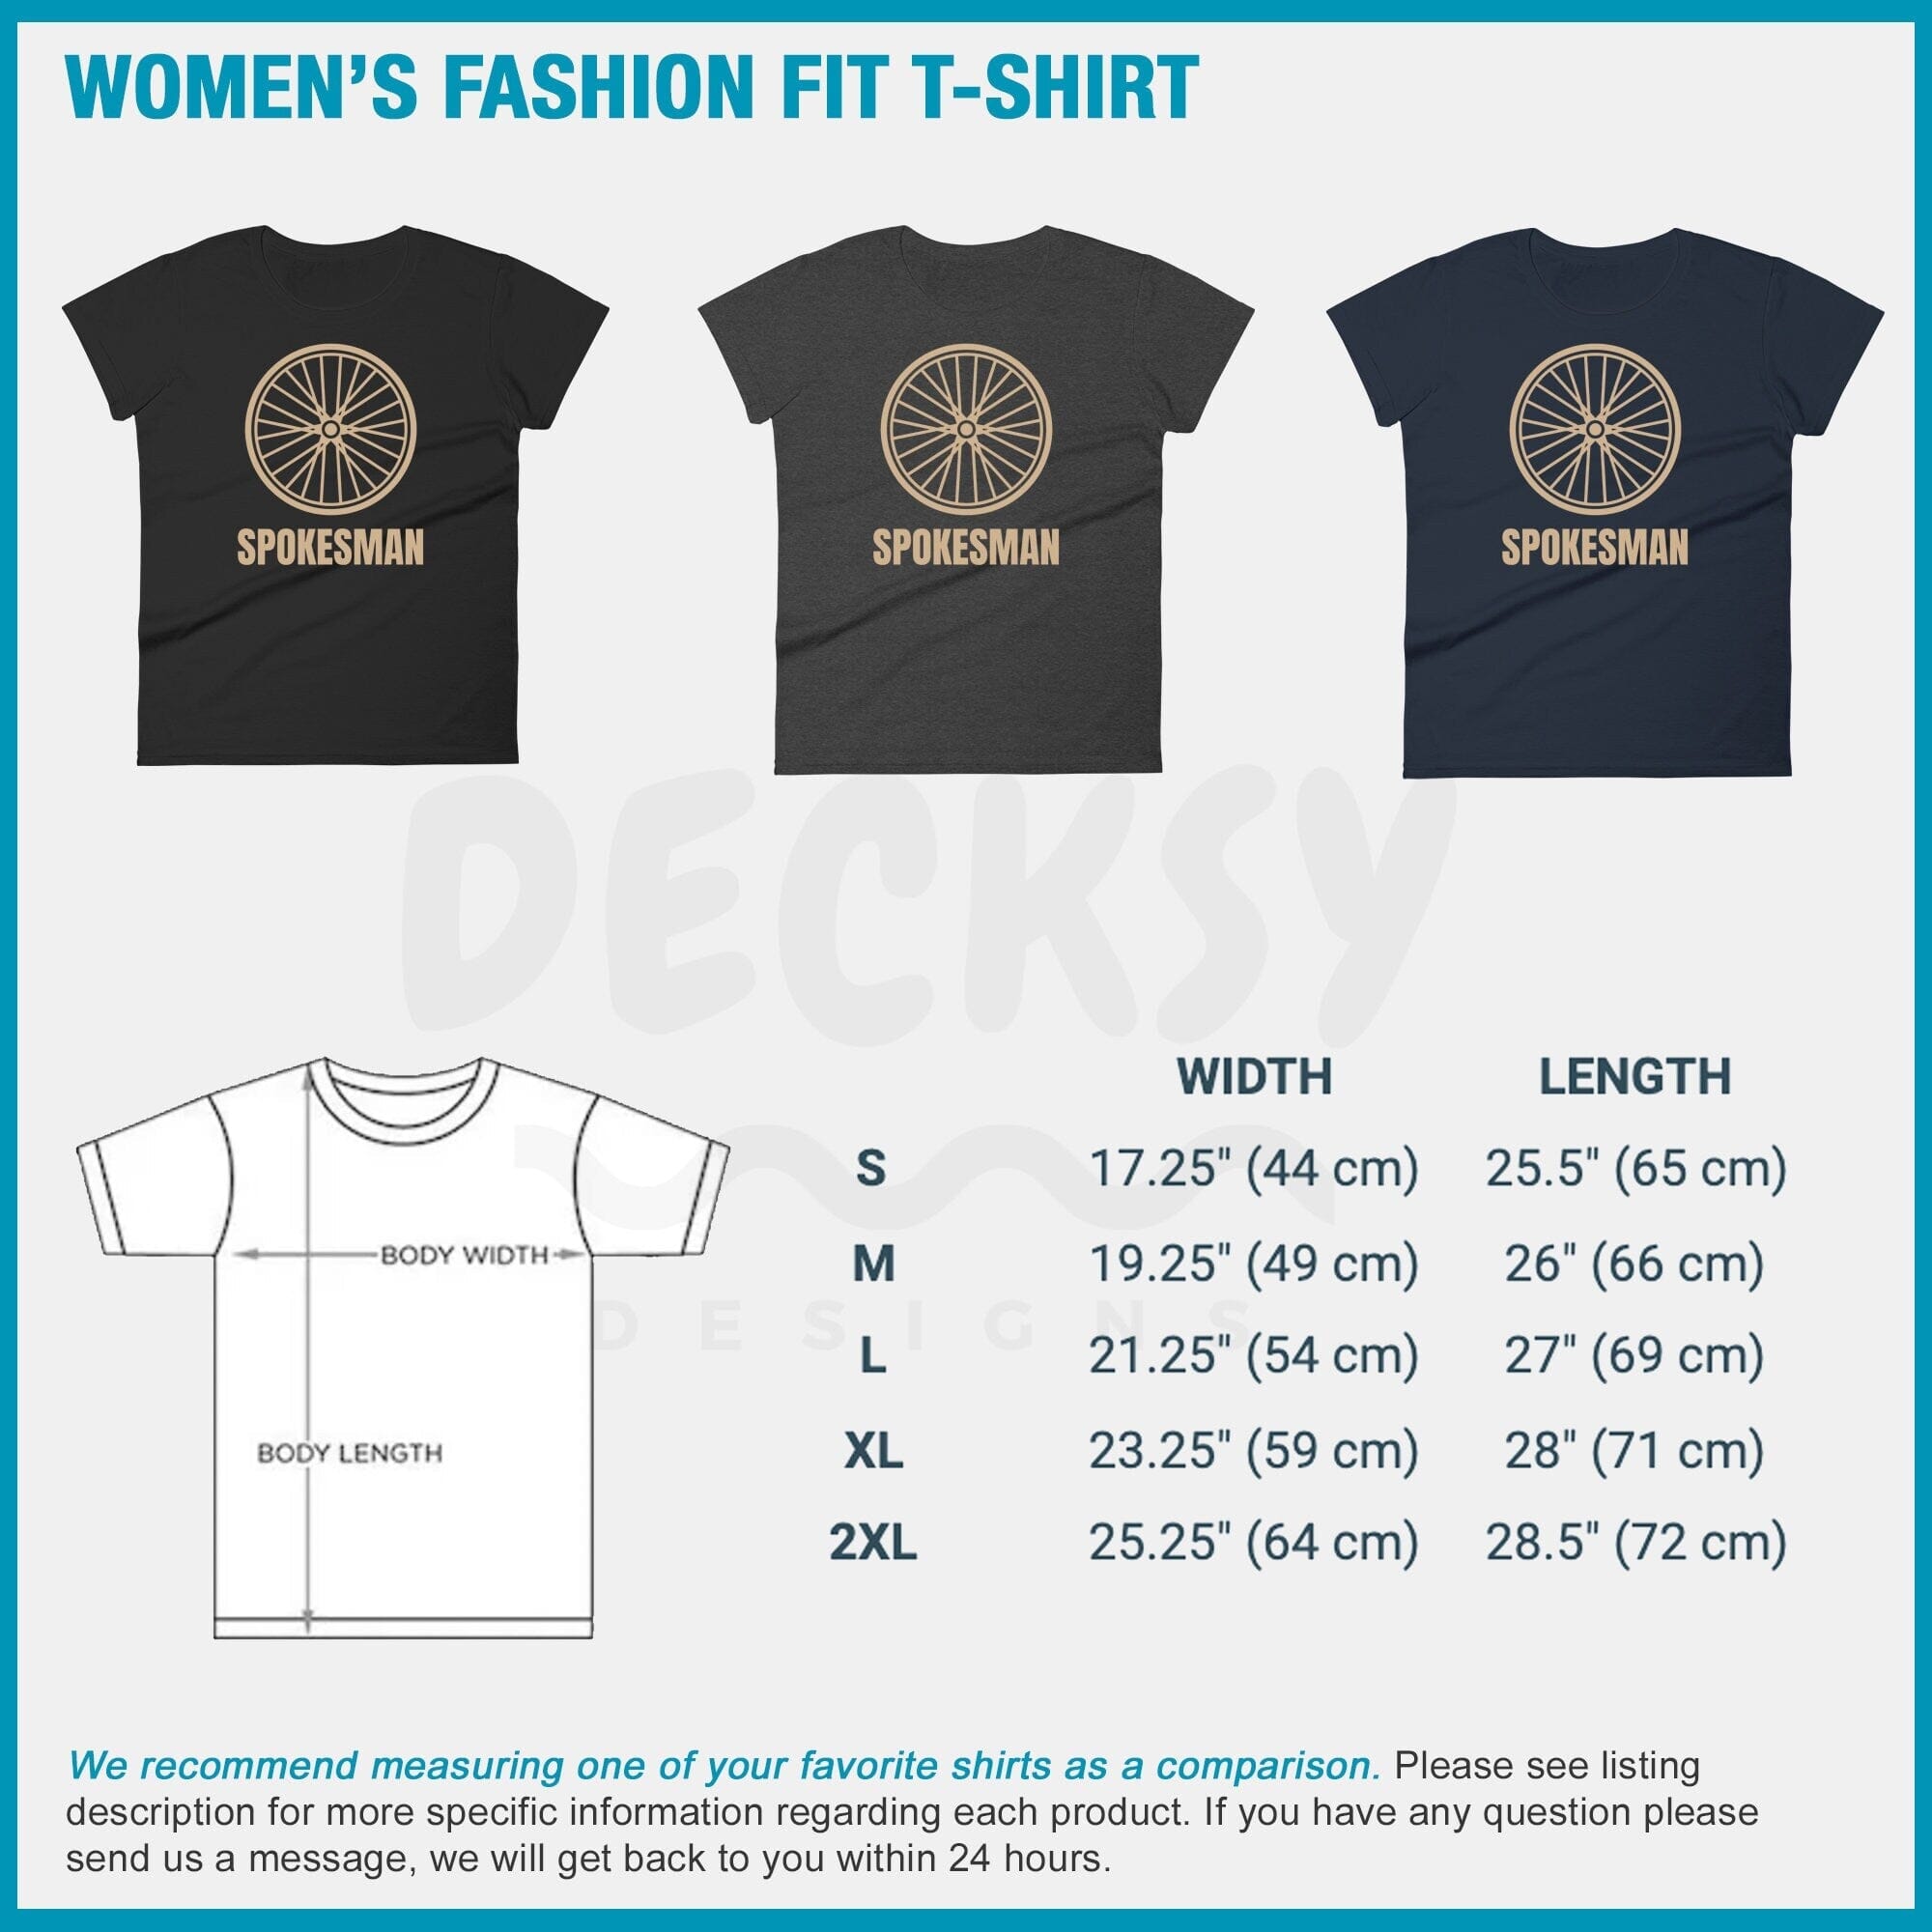 Cycling Tshirt, Gift For Cyclists-Clothing:Gender-Neutral Adult Clothing:Tops & Tees:T-shirts:Graphic Tees-DecksyDesigns